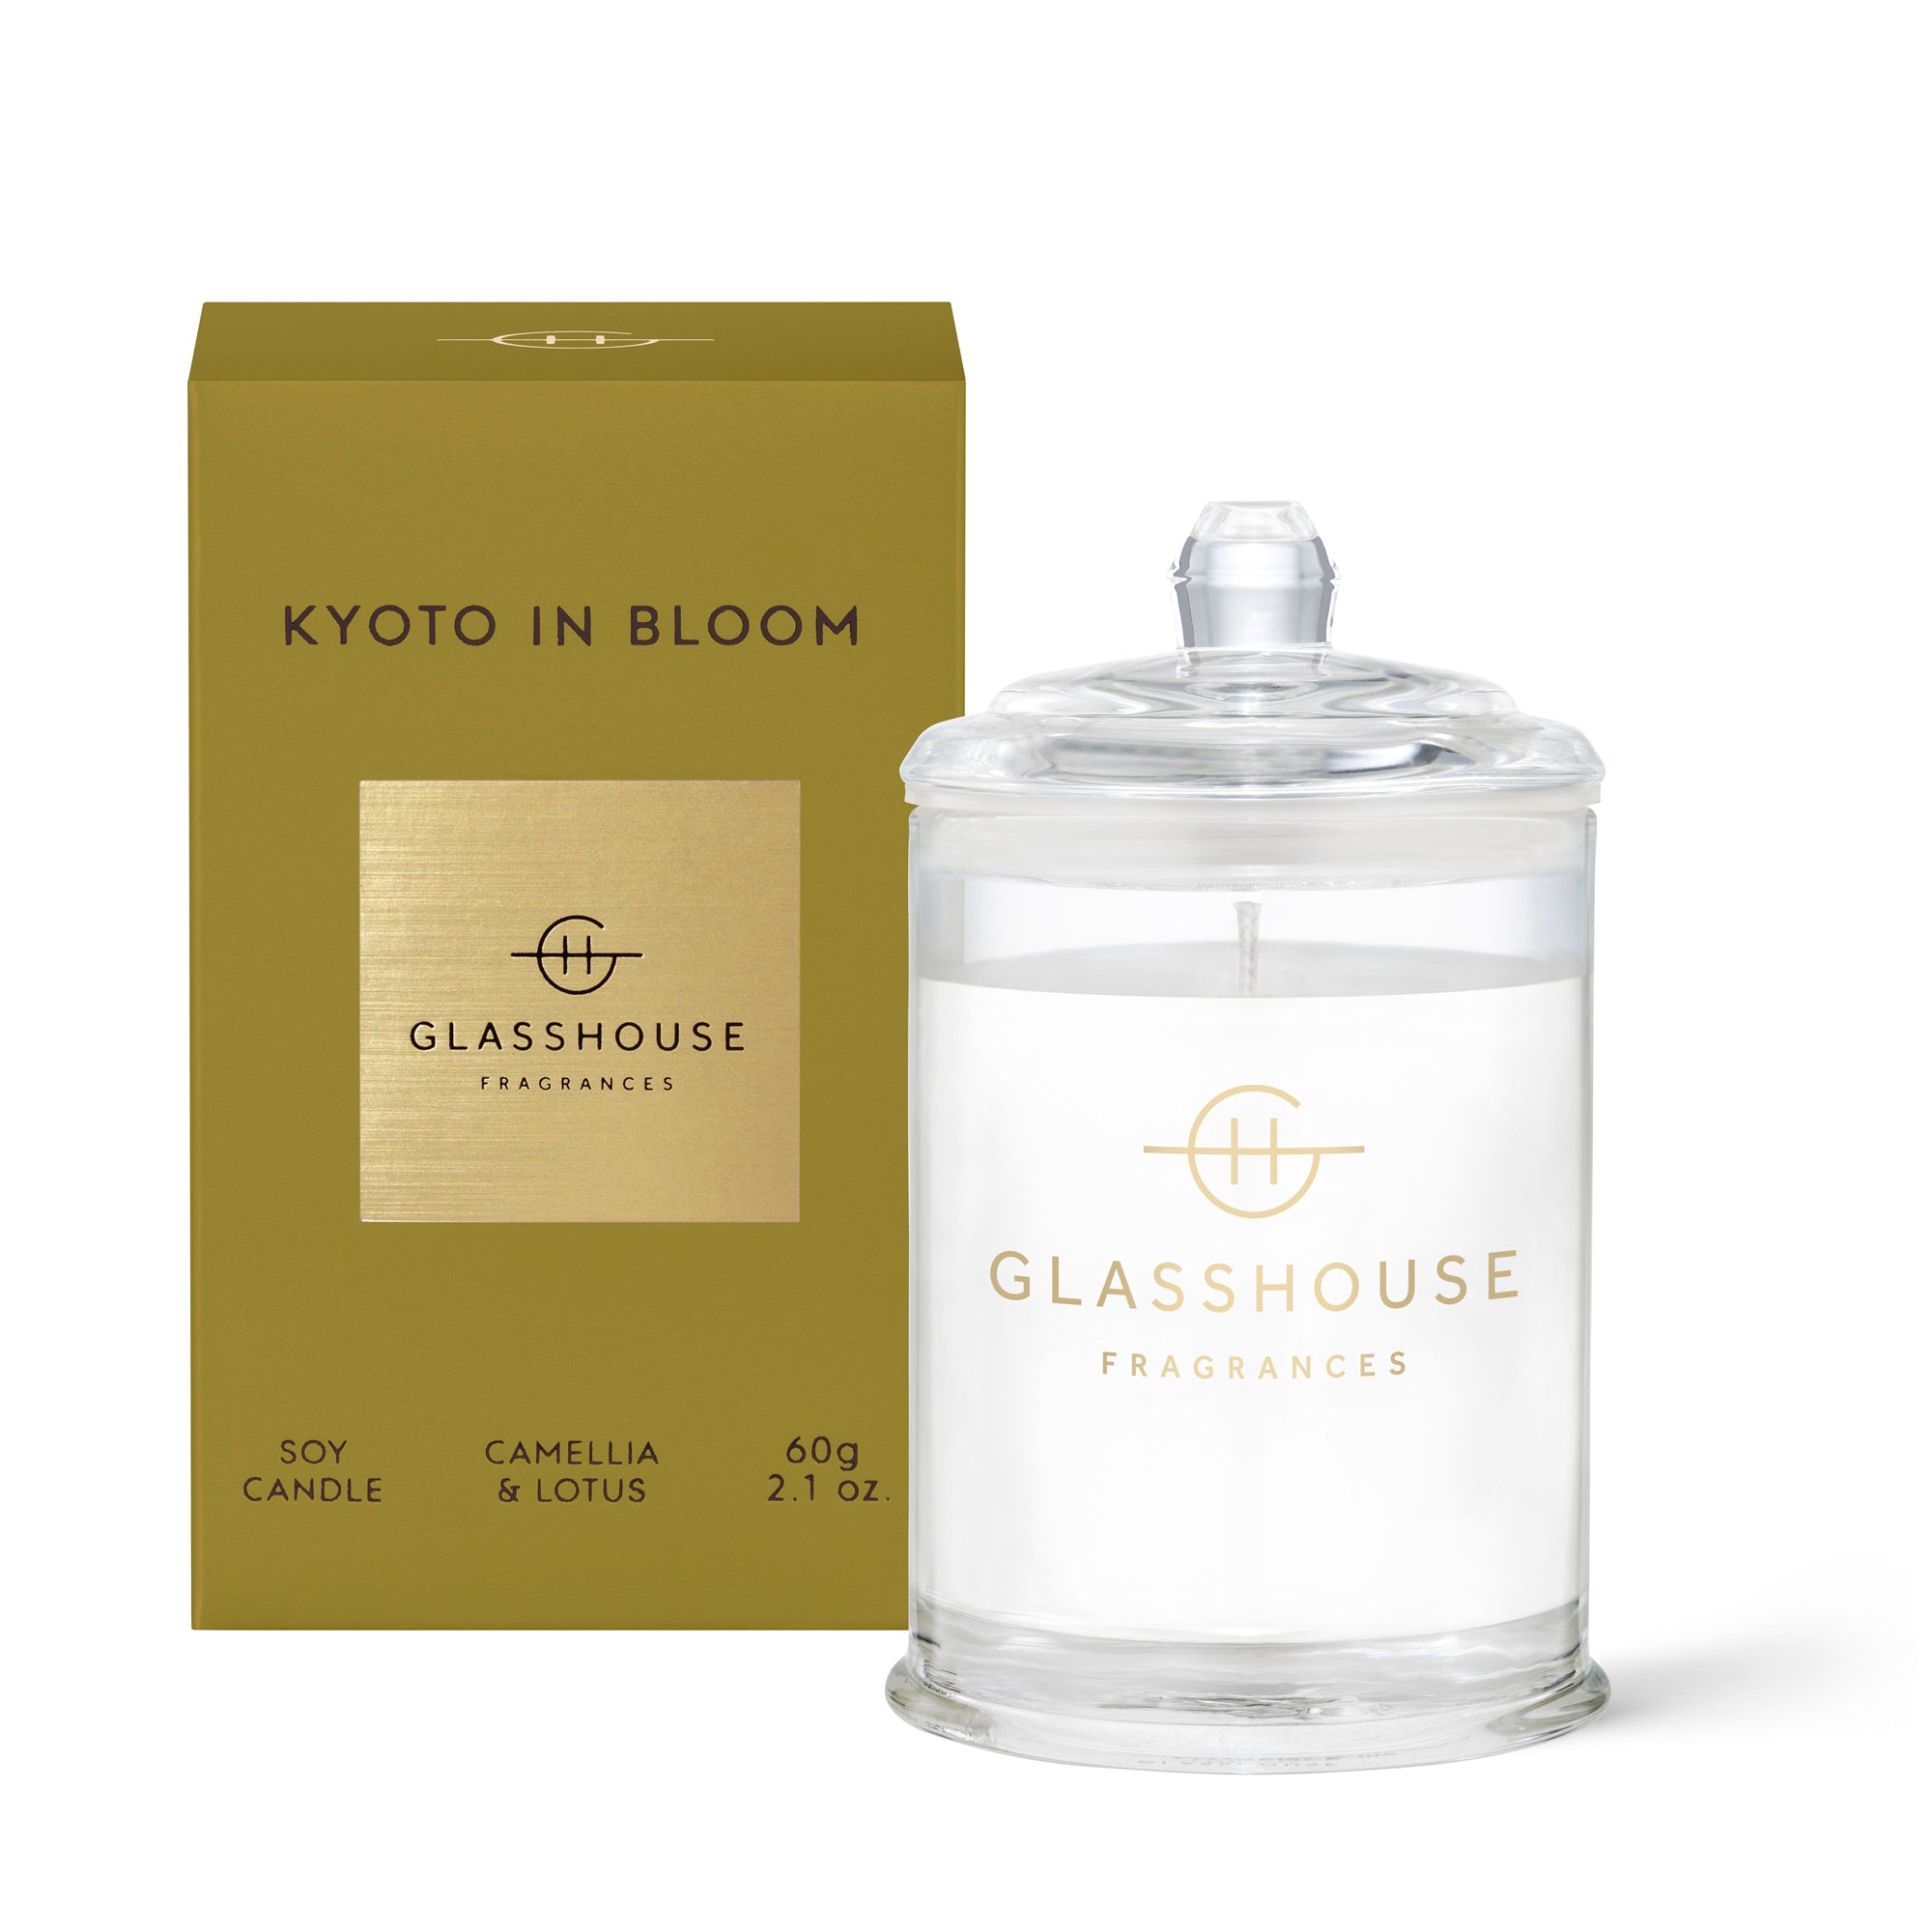 GLASSHOUSE - KYOTO IN BLOOM Candle 60g